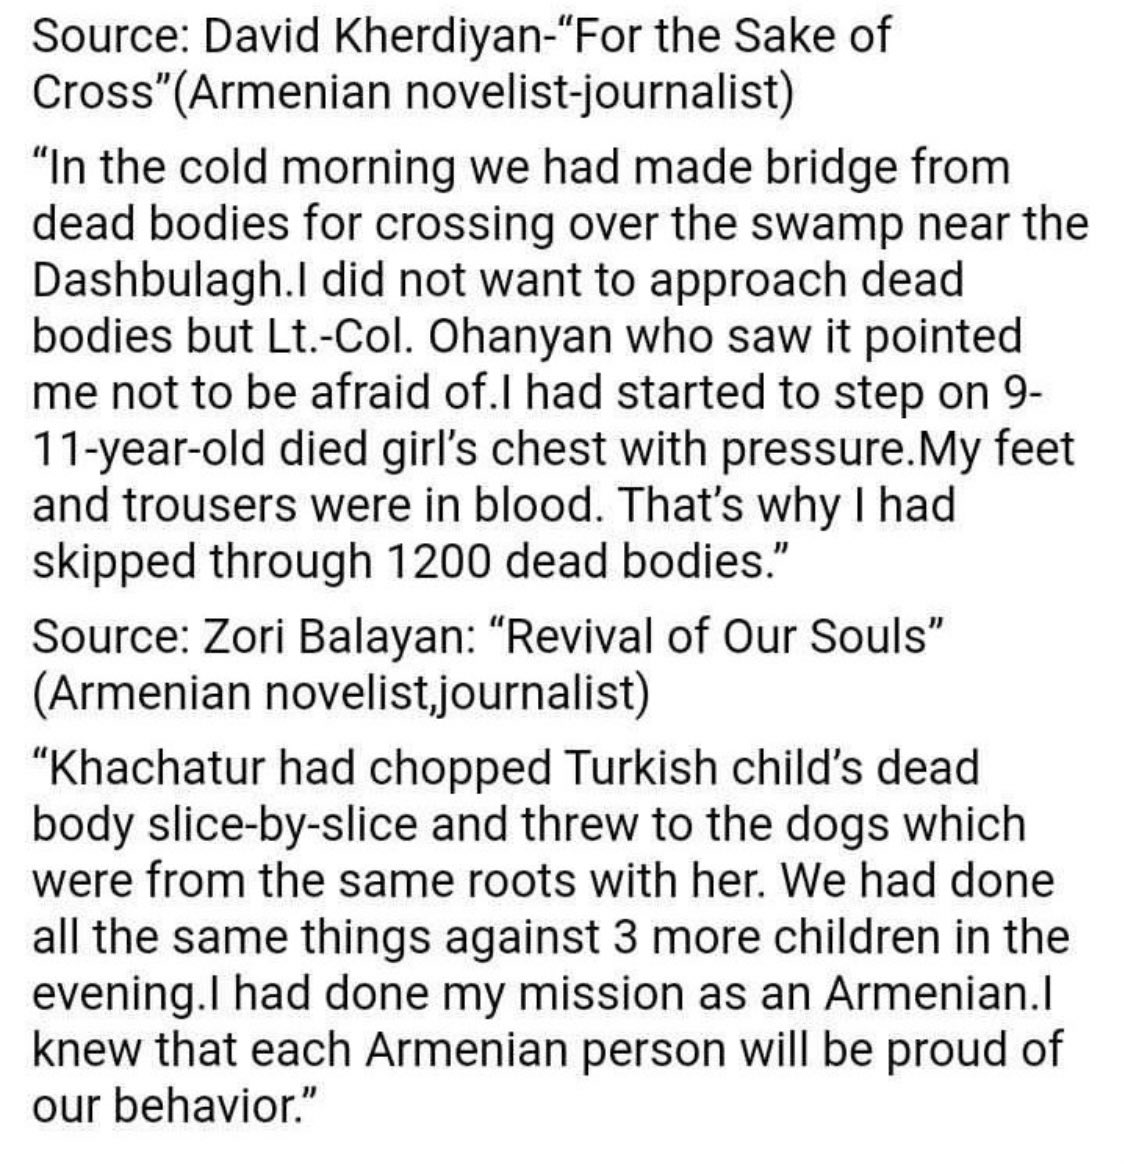 tw extreme violence gore war innocent people were TORTURED in Khojaly. armenian troops cut pregnant women, killed the premature babies, made bridges out of girls and burned them, peed in the victims mouthes. there are pictures of this that i wont include as its very graphic.